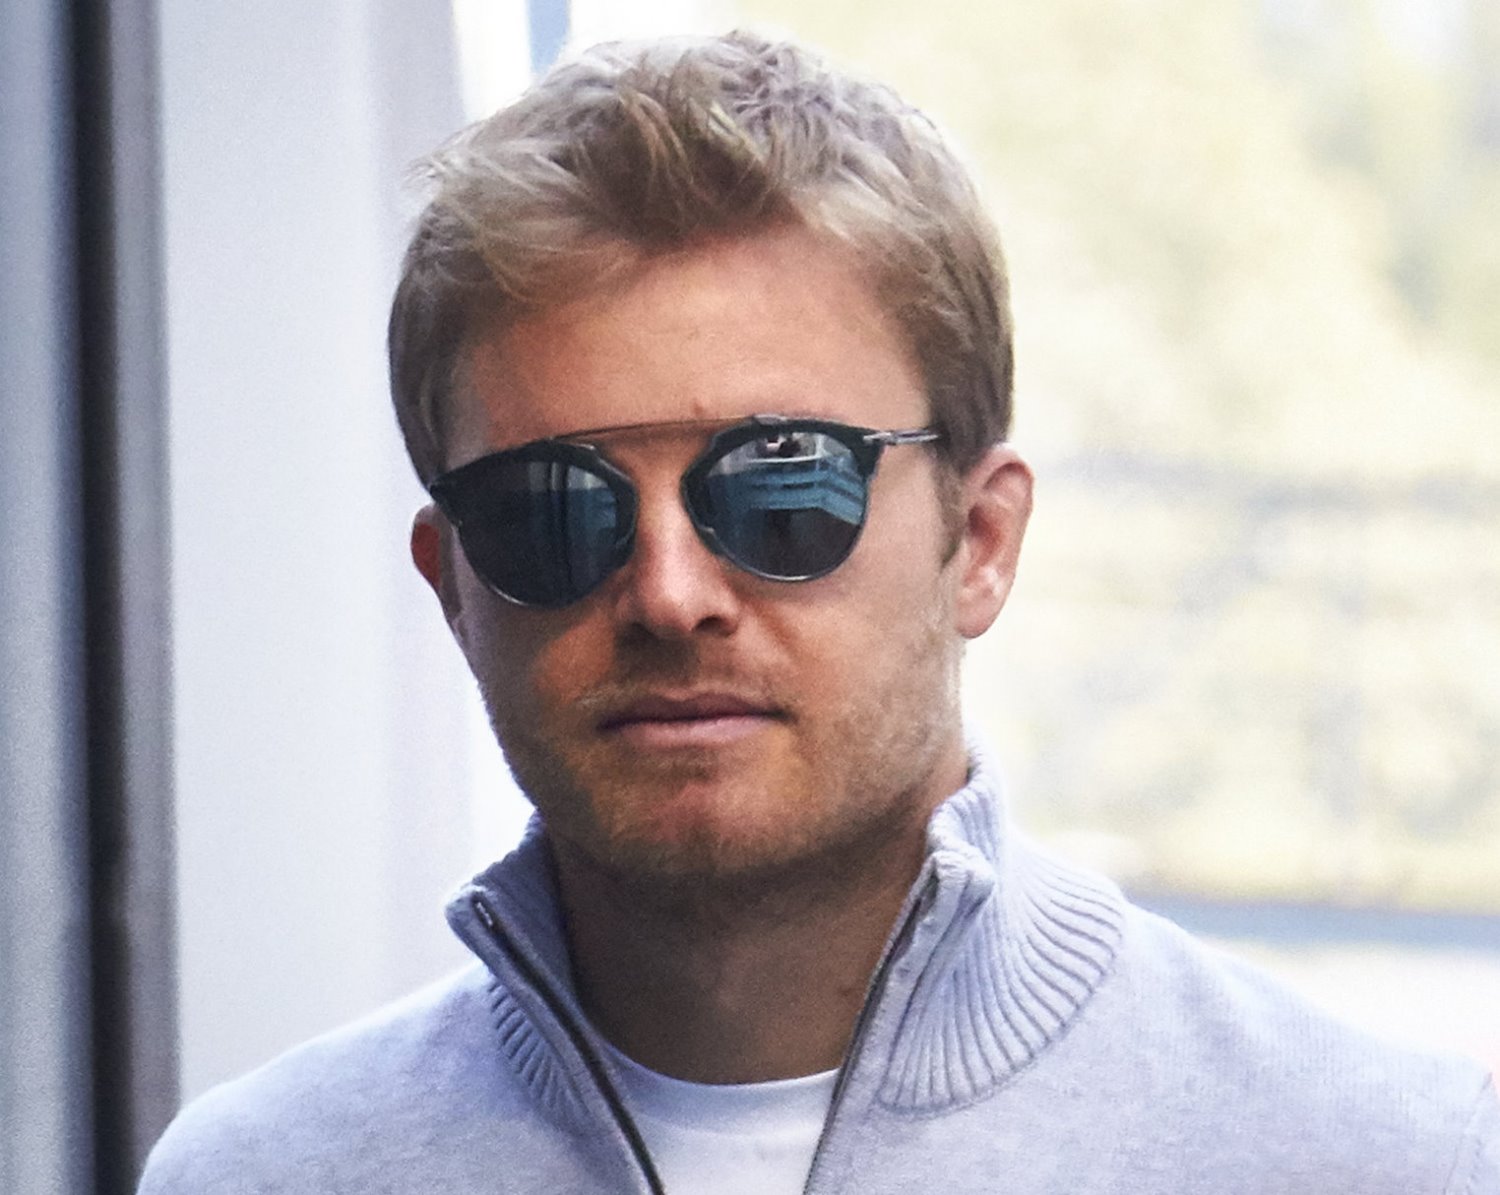 Rosberg would be a fool to leave the best car in F1